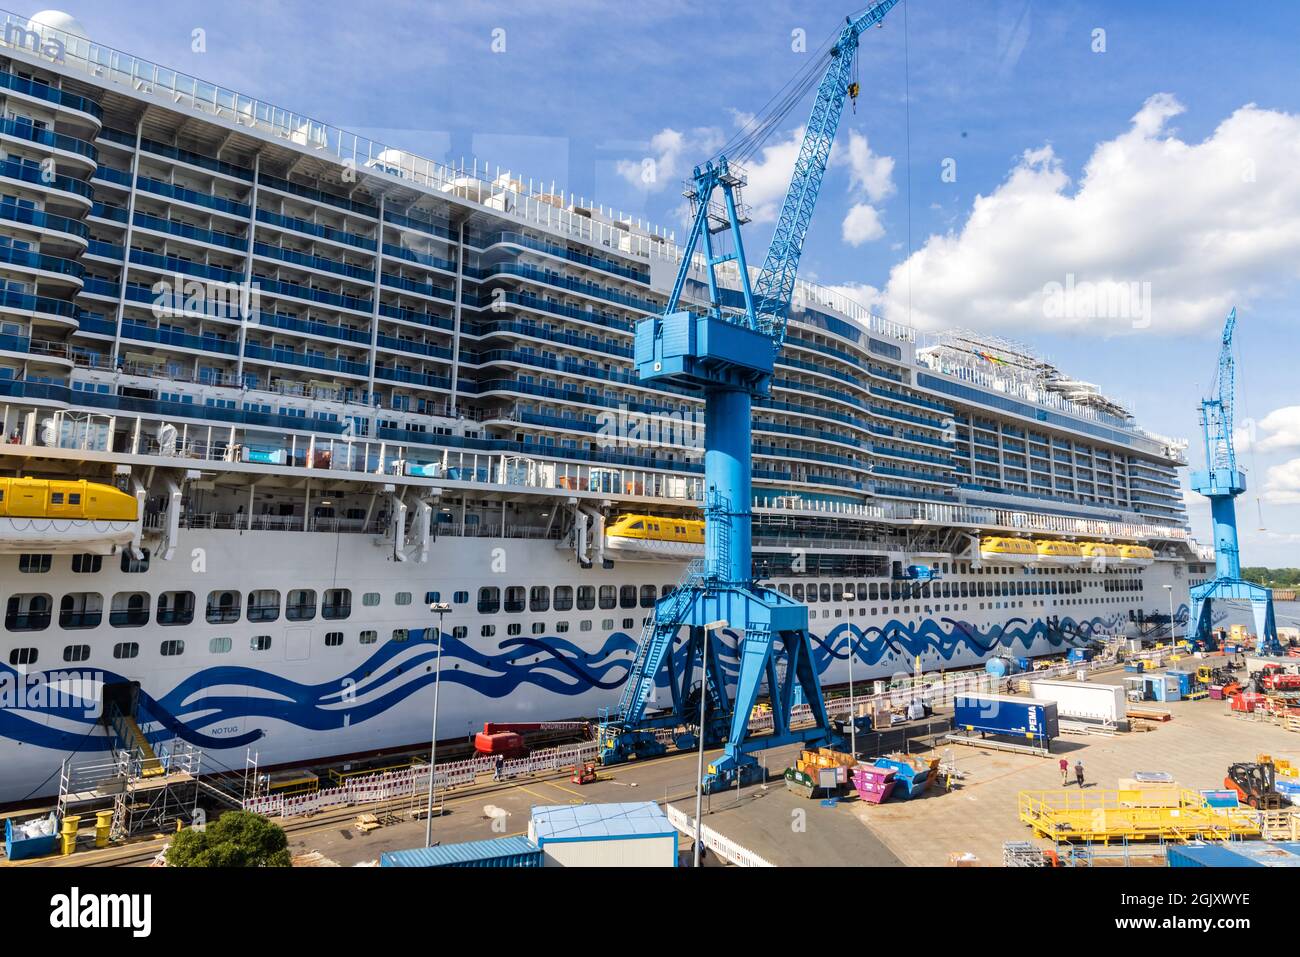 Papenburg, Germany - August 24, 2021: New cruise ship AIDA cosma at Shipyard Meyer in Papenburg largest shipyards in the world building cruise ships for international shipping companies for decades. Stock Photo